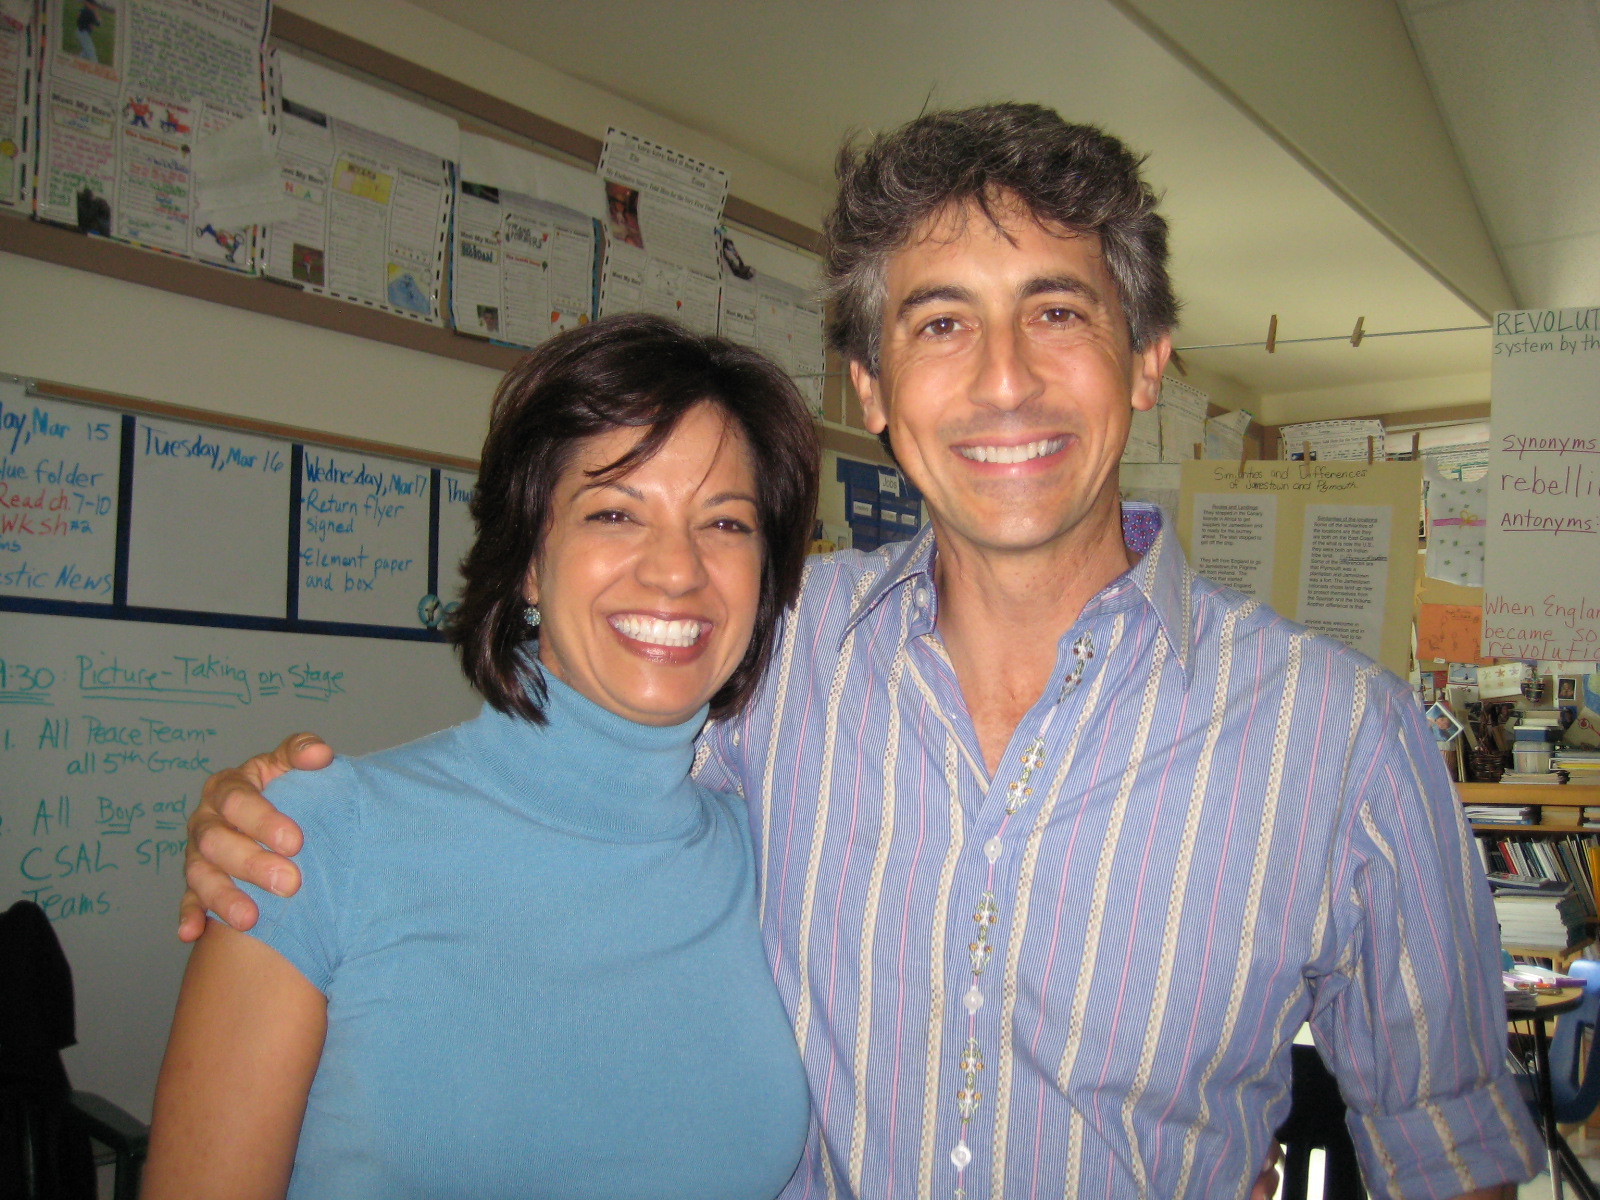 On the set of The Descendants, playing the role of Dr. Thull. With Director Alexander Payne